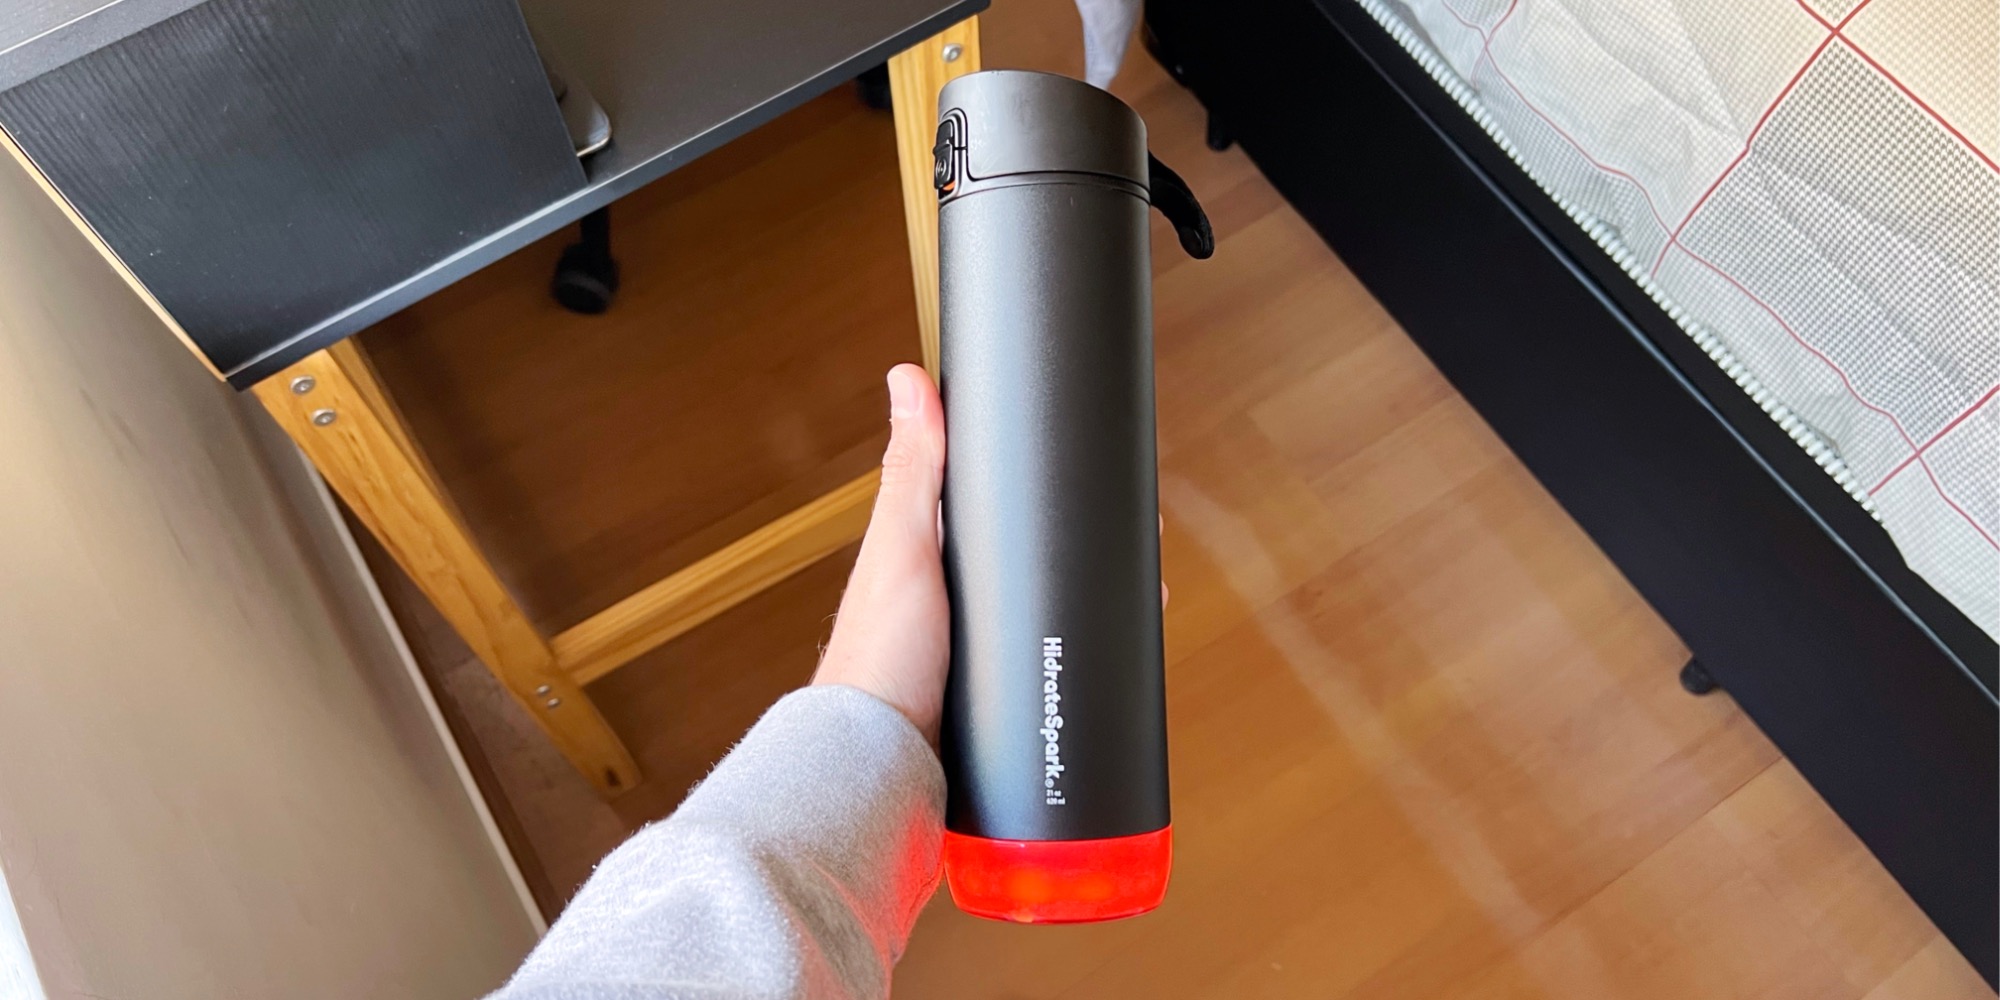 https://9to5mac.com/wp-content/uploads/sites/6/2022/05/hidratespark-pro-steel-water-bottle-9to5mac-1.jpg?quality=82&strip=all